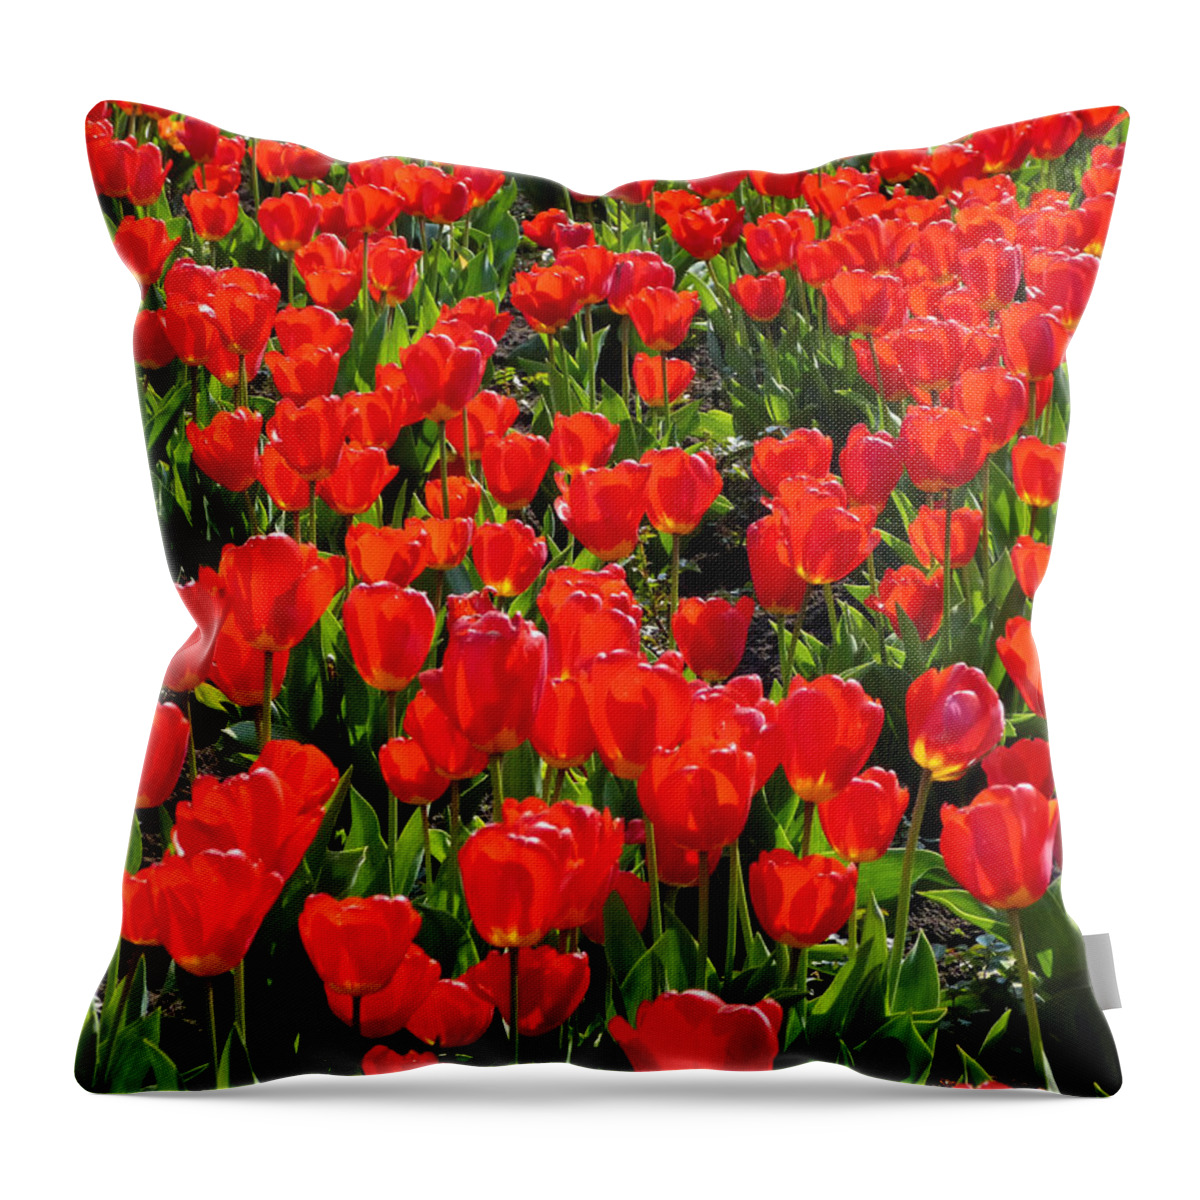 Tulips Throw Pillow featuring the photograph Tulips by Hartmut Knisel